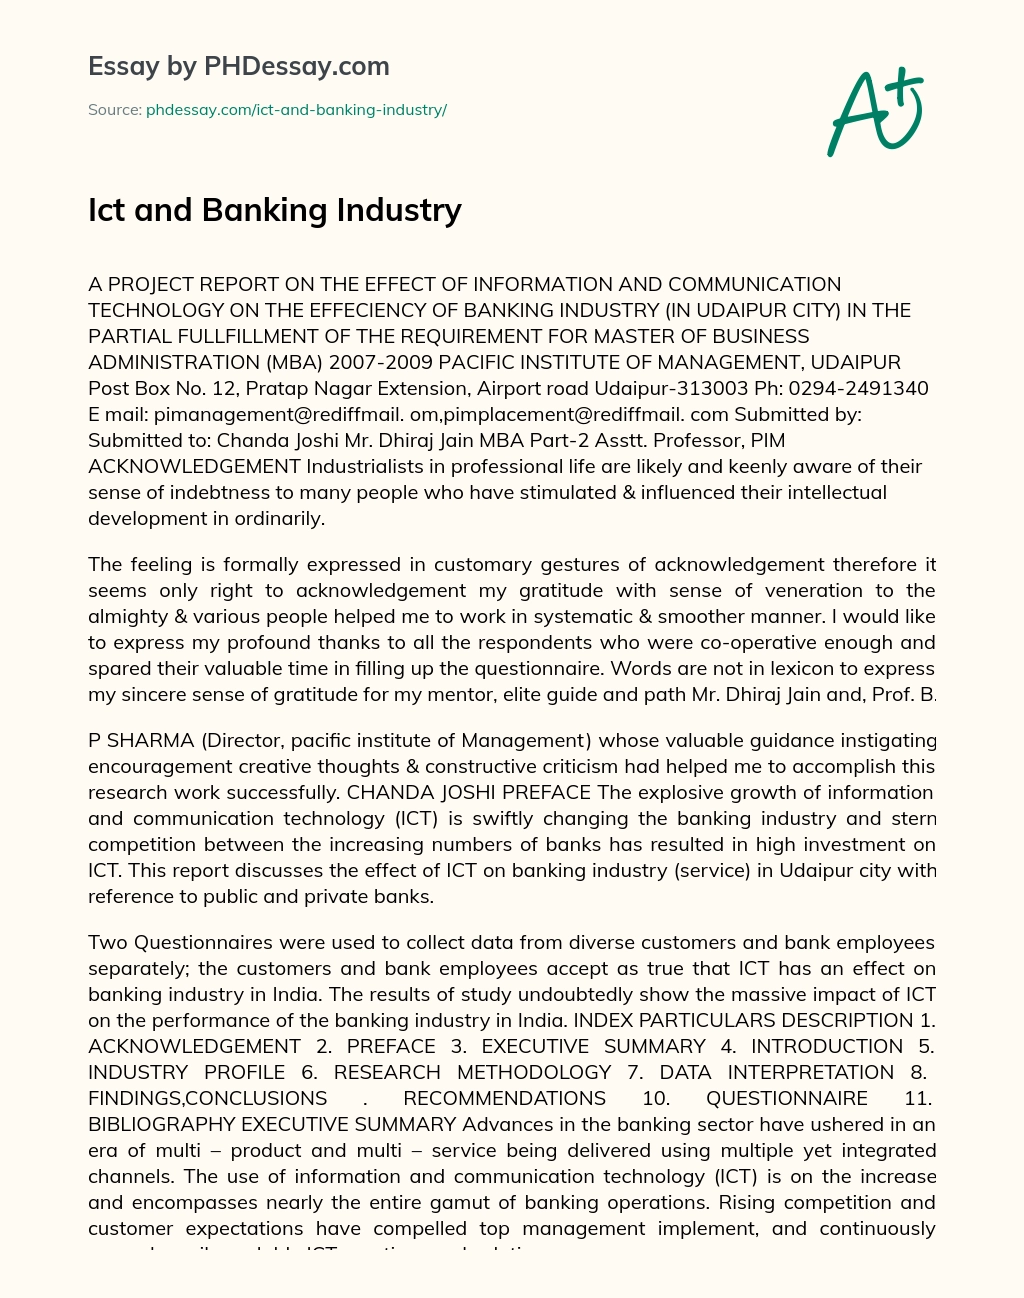 Ict and Banking Industry essay